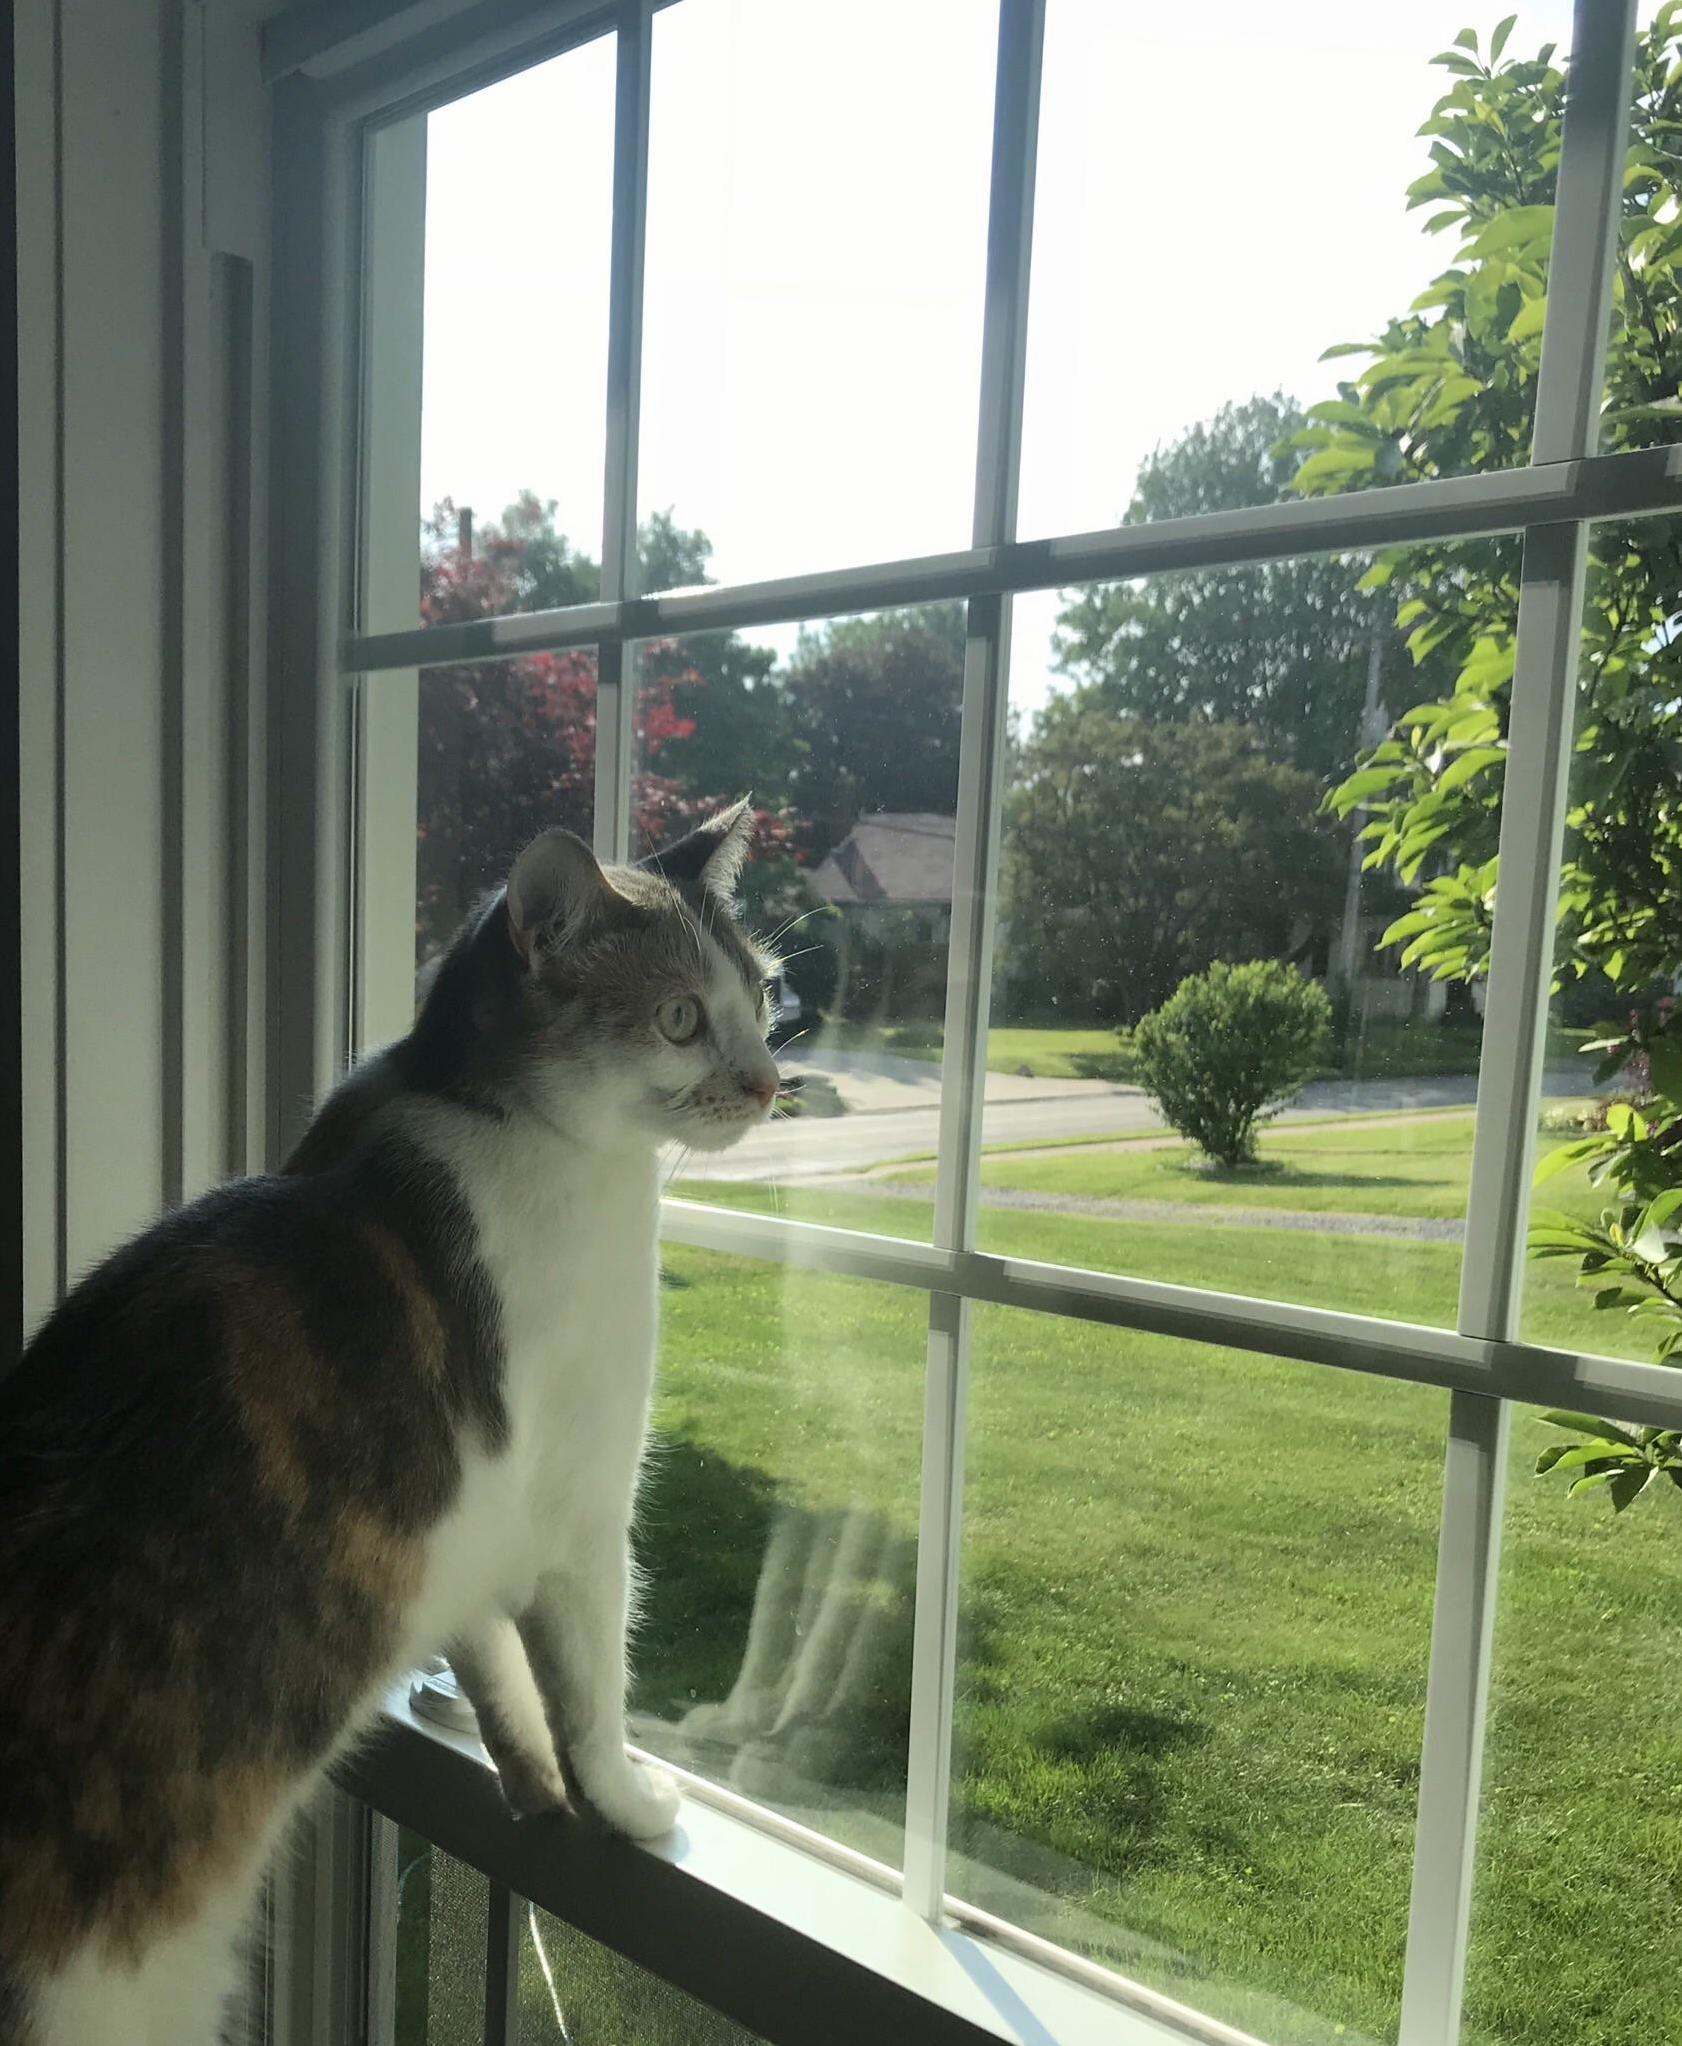 Cat tv is especially interesting today. lots of squirrels and birbs.